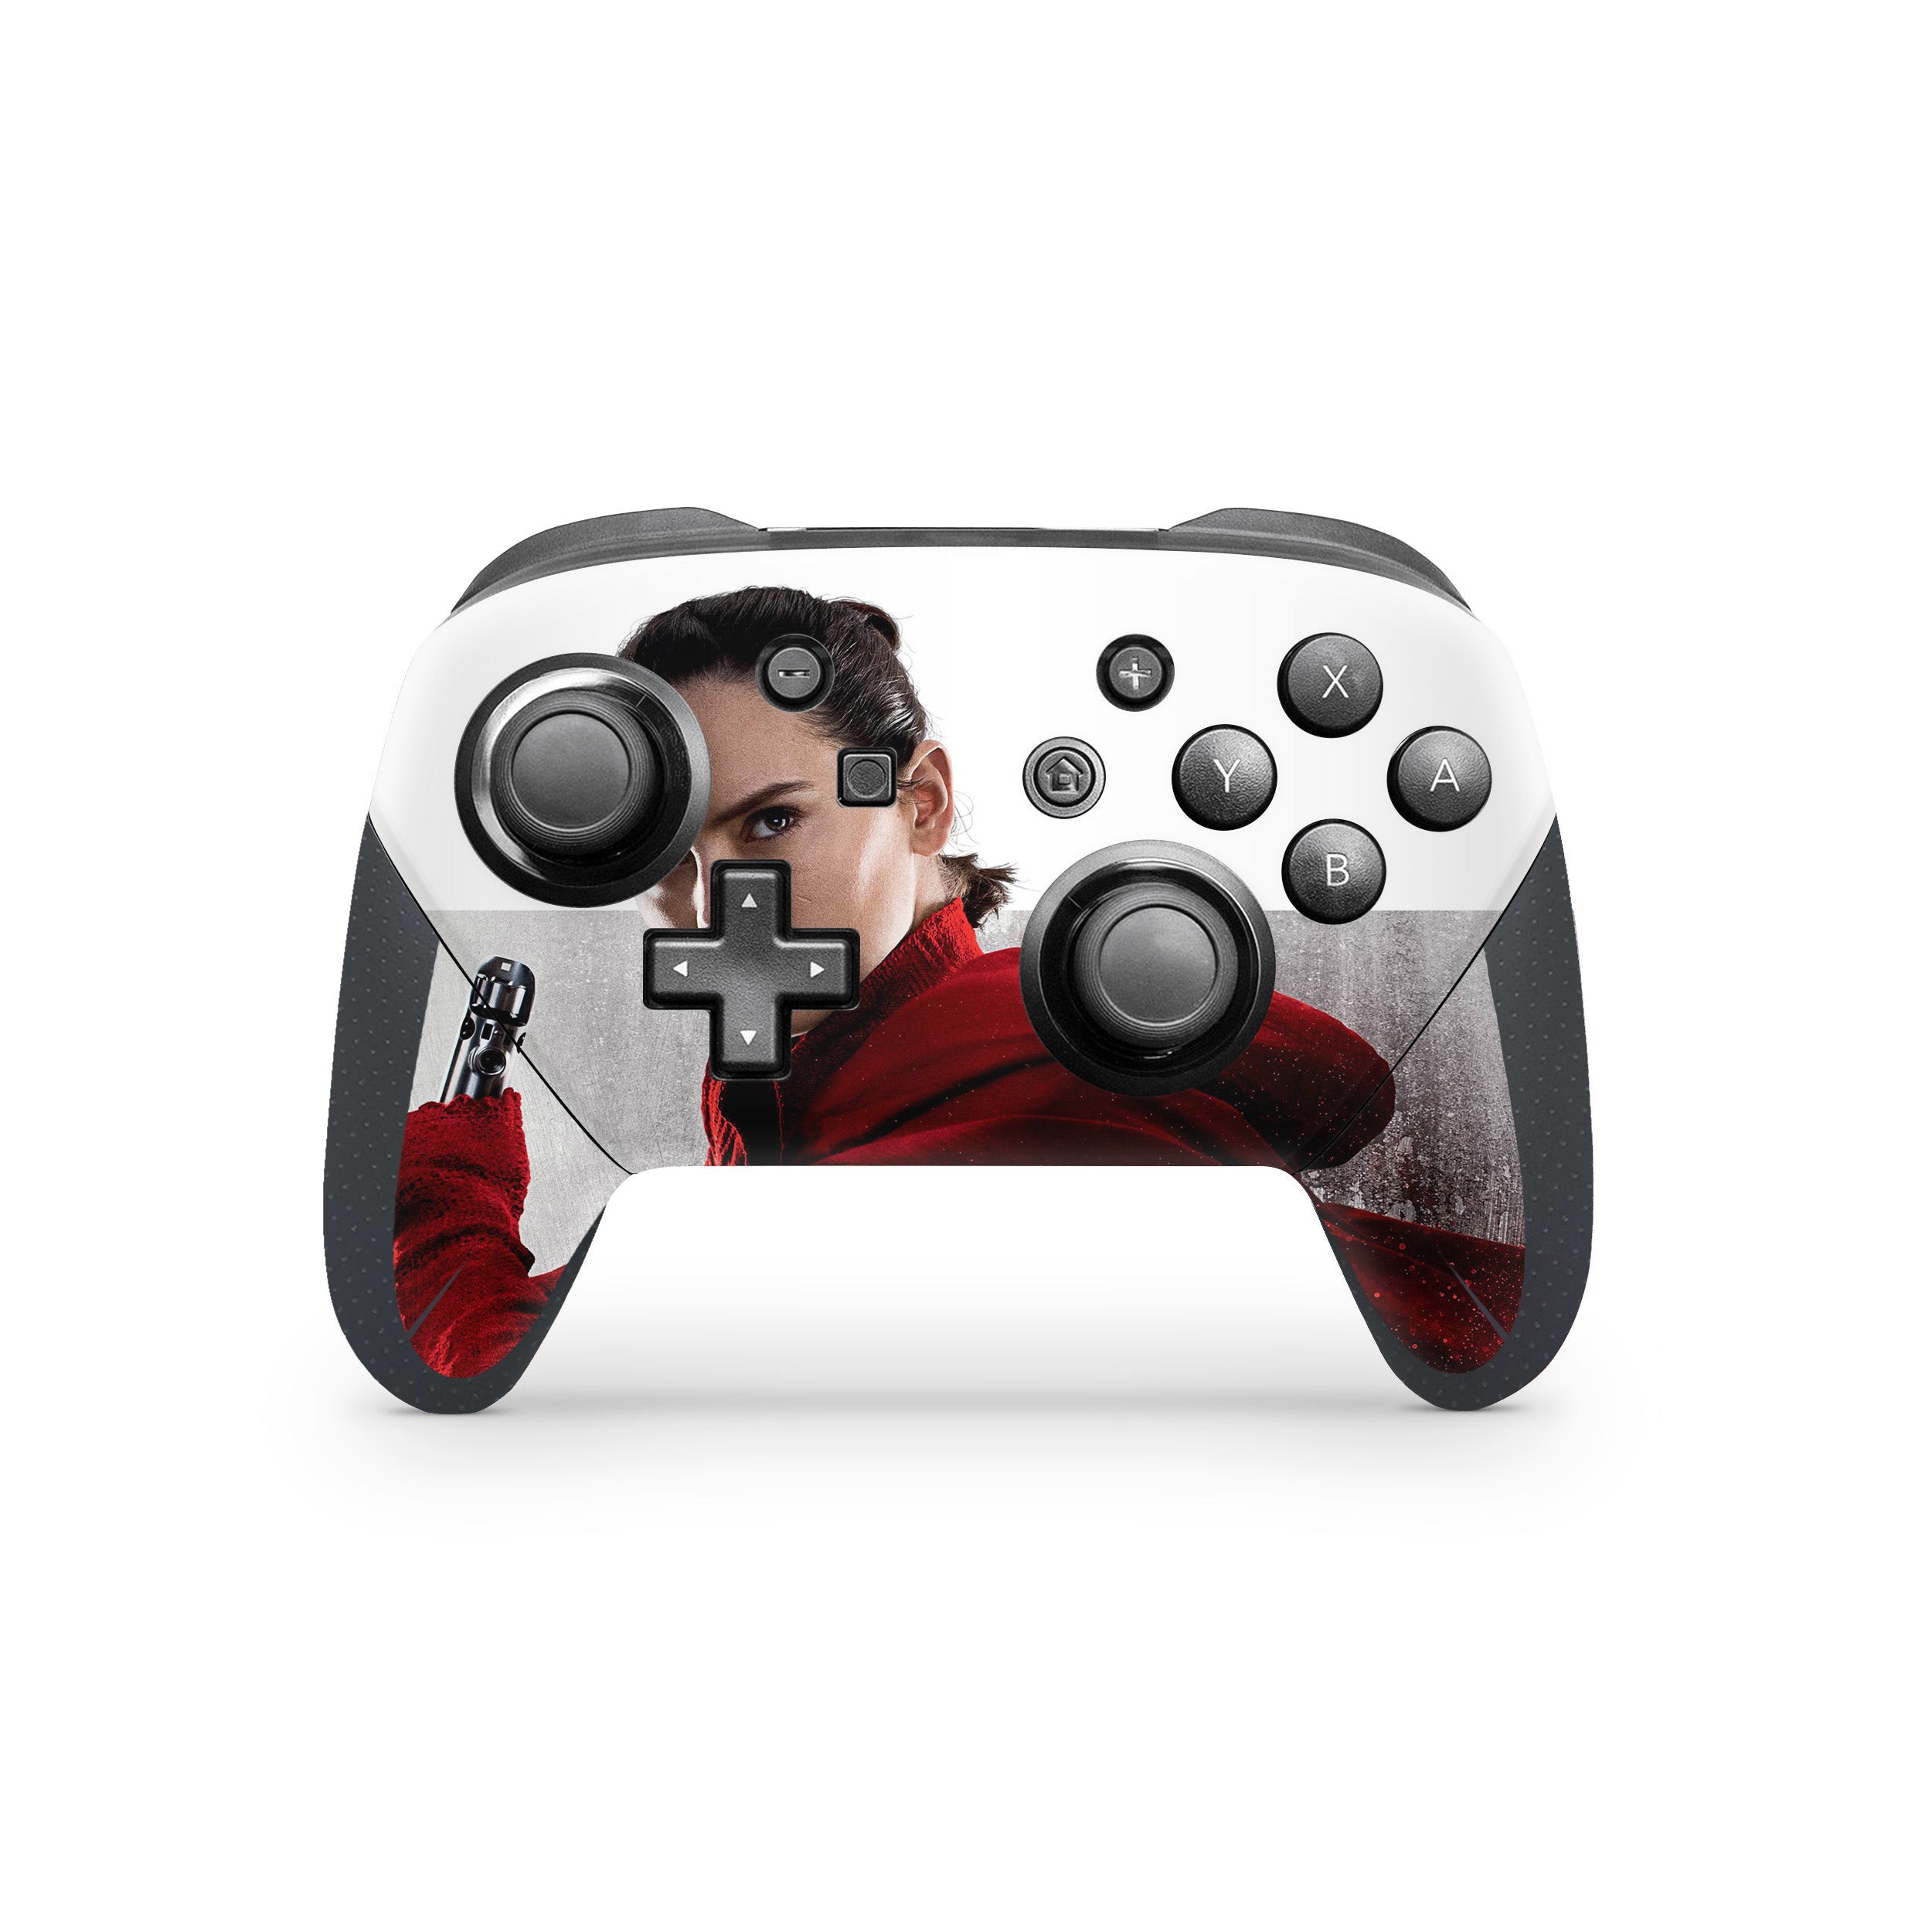 A video game skin featuring a Star Wars Rey design for the Switch Pro Controller.